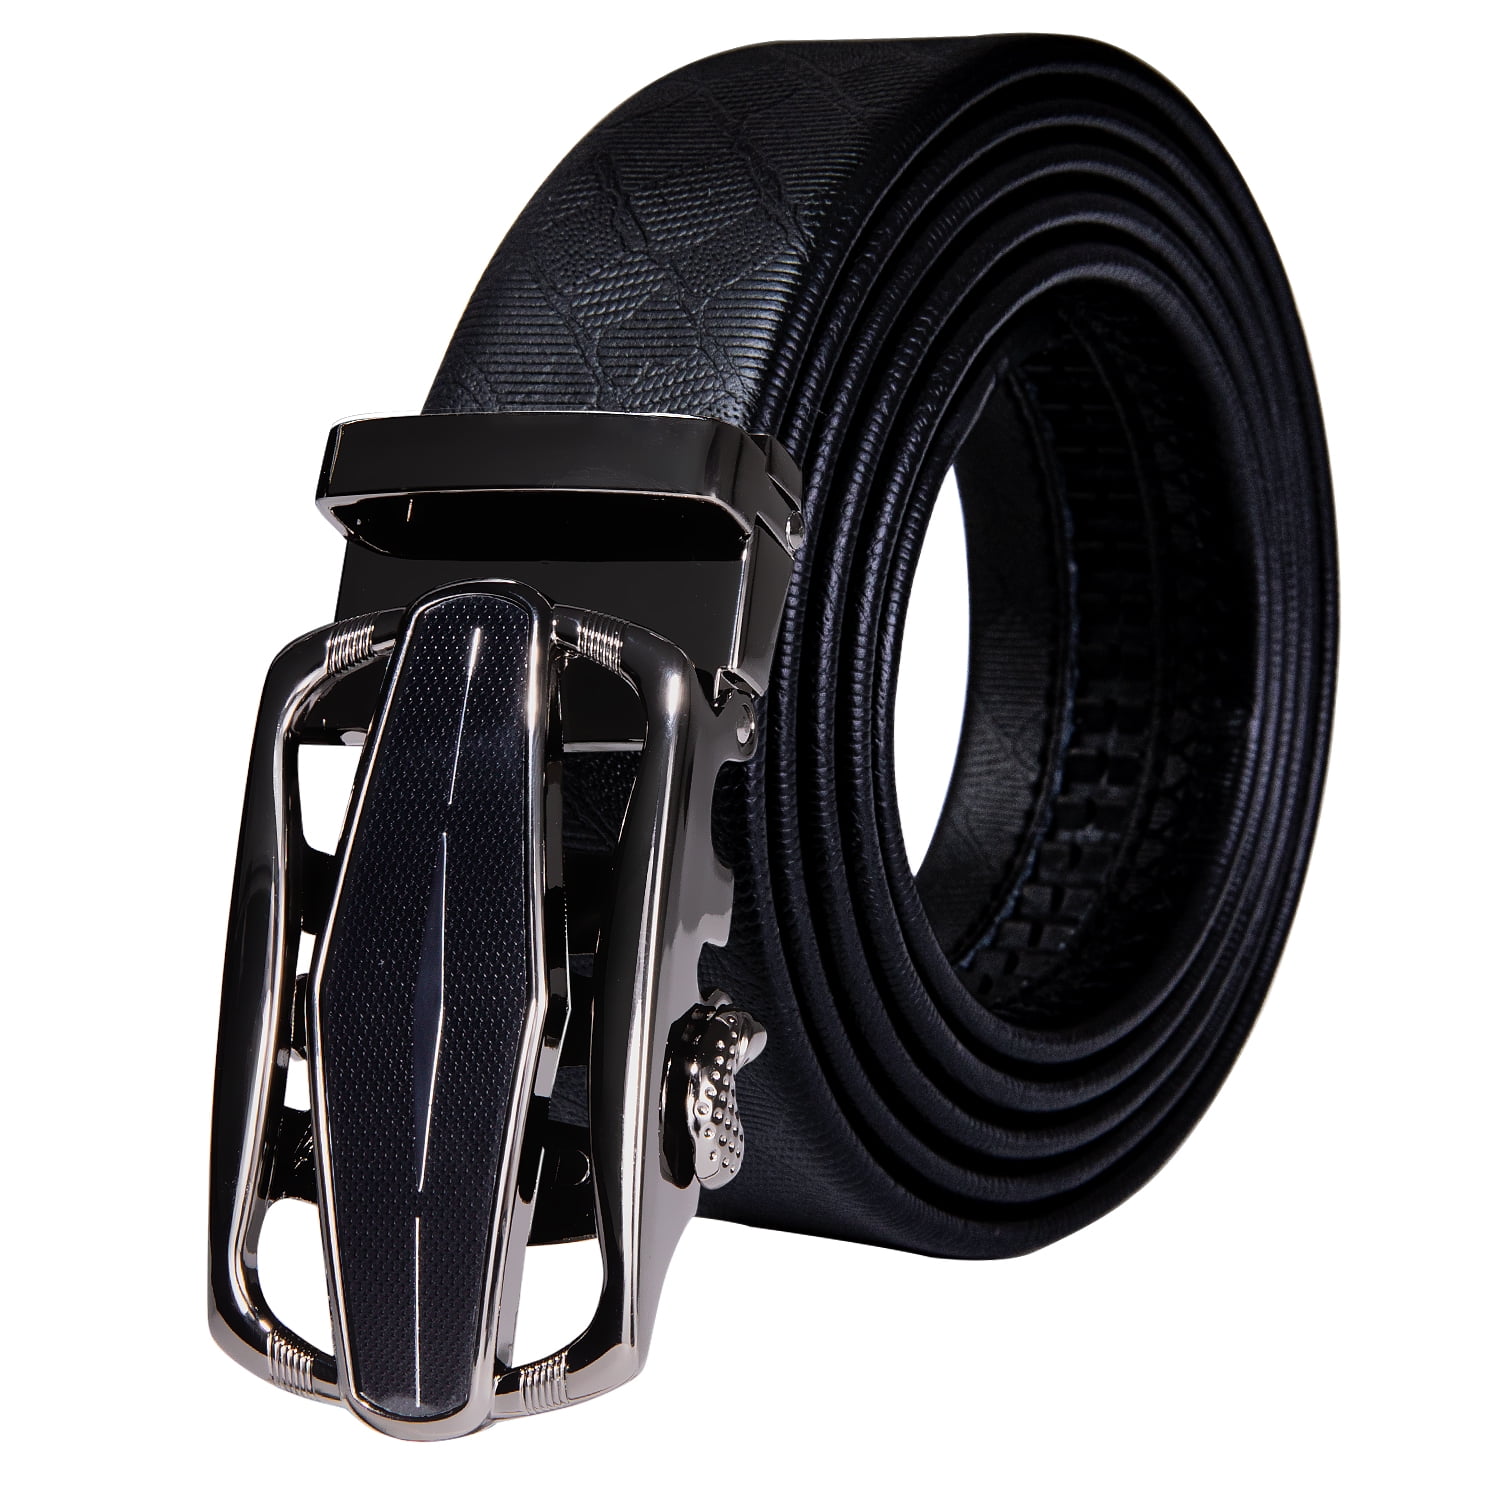 Barry.Wang Business Mens Belt Black Cuttable Ratchet Classic Cowhide  Leather Stainless Steel Buck Automatic Nickel Free Dress Belt :  : Fashion